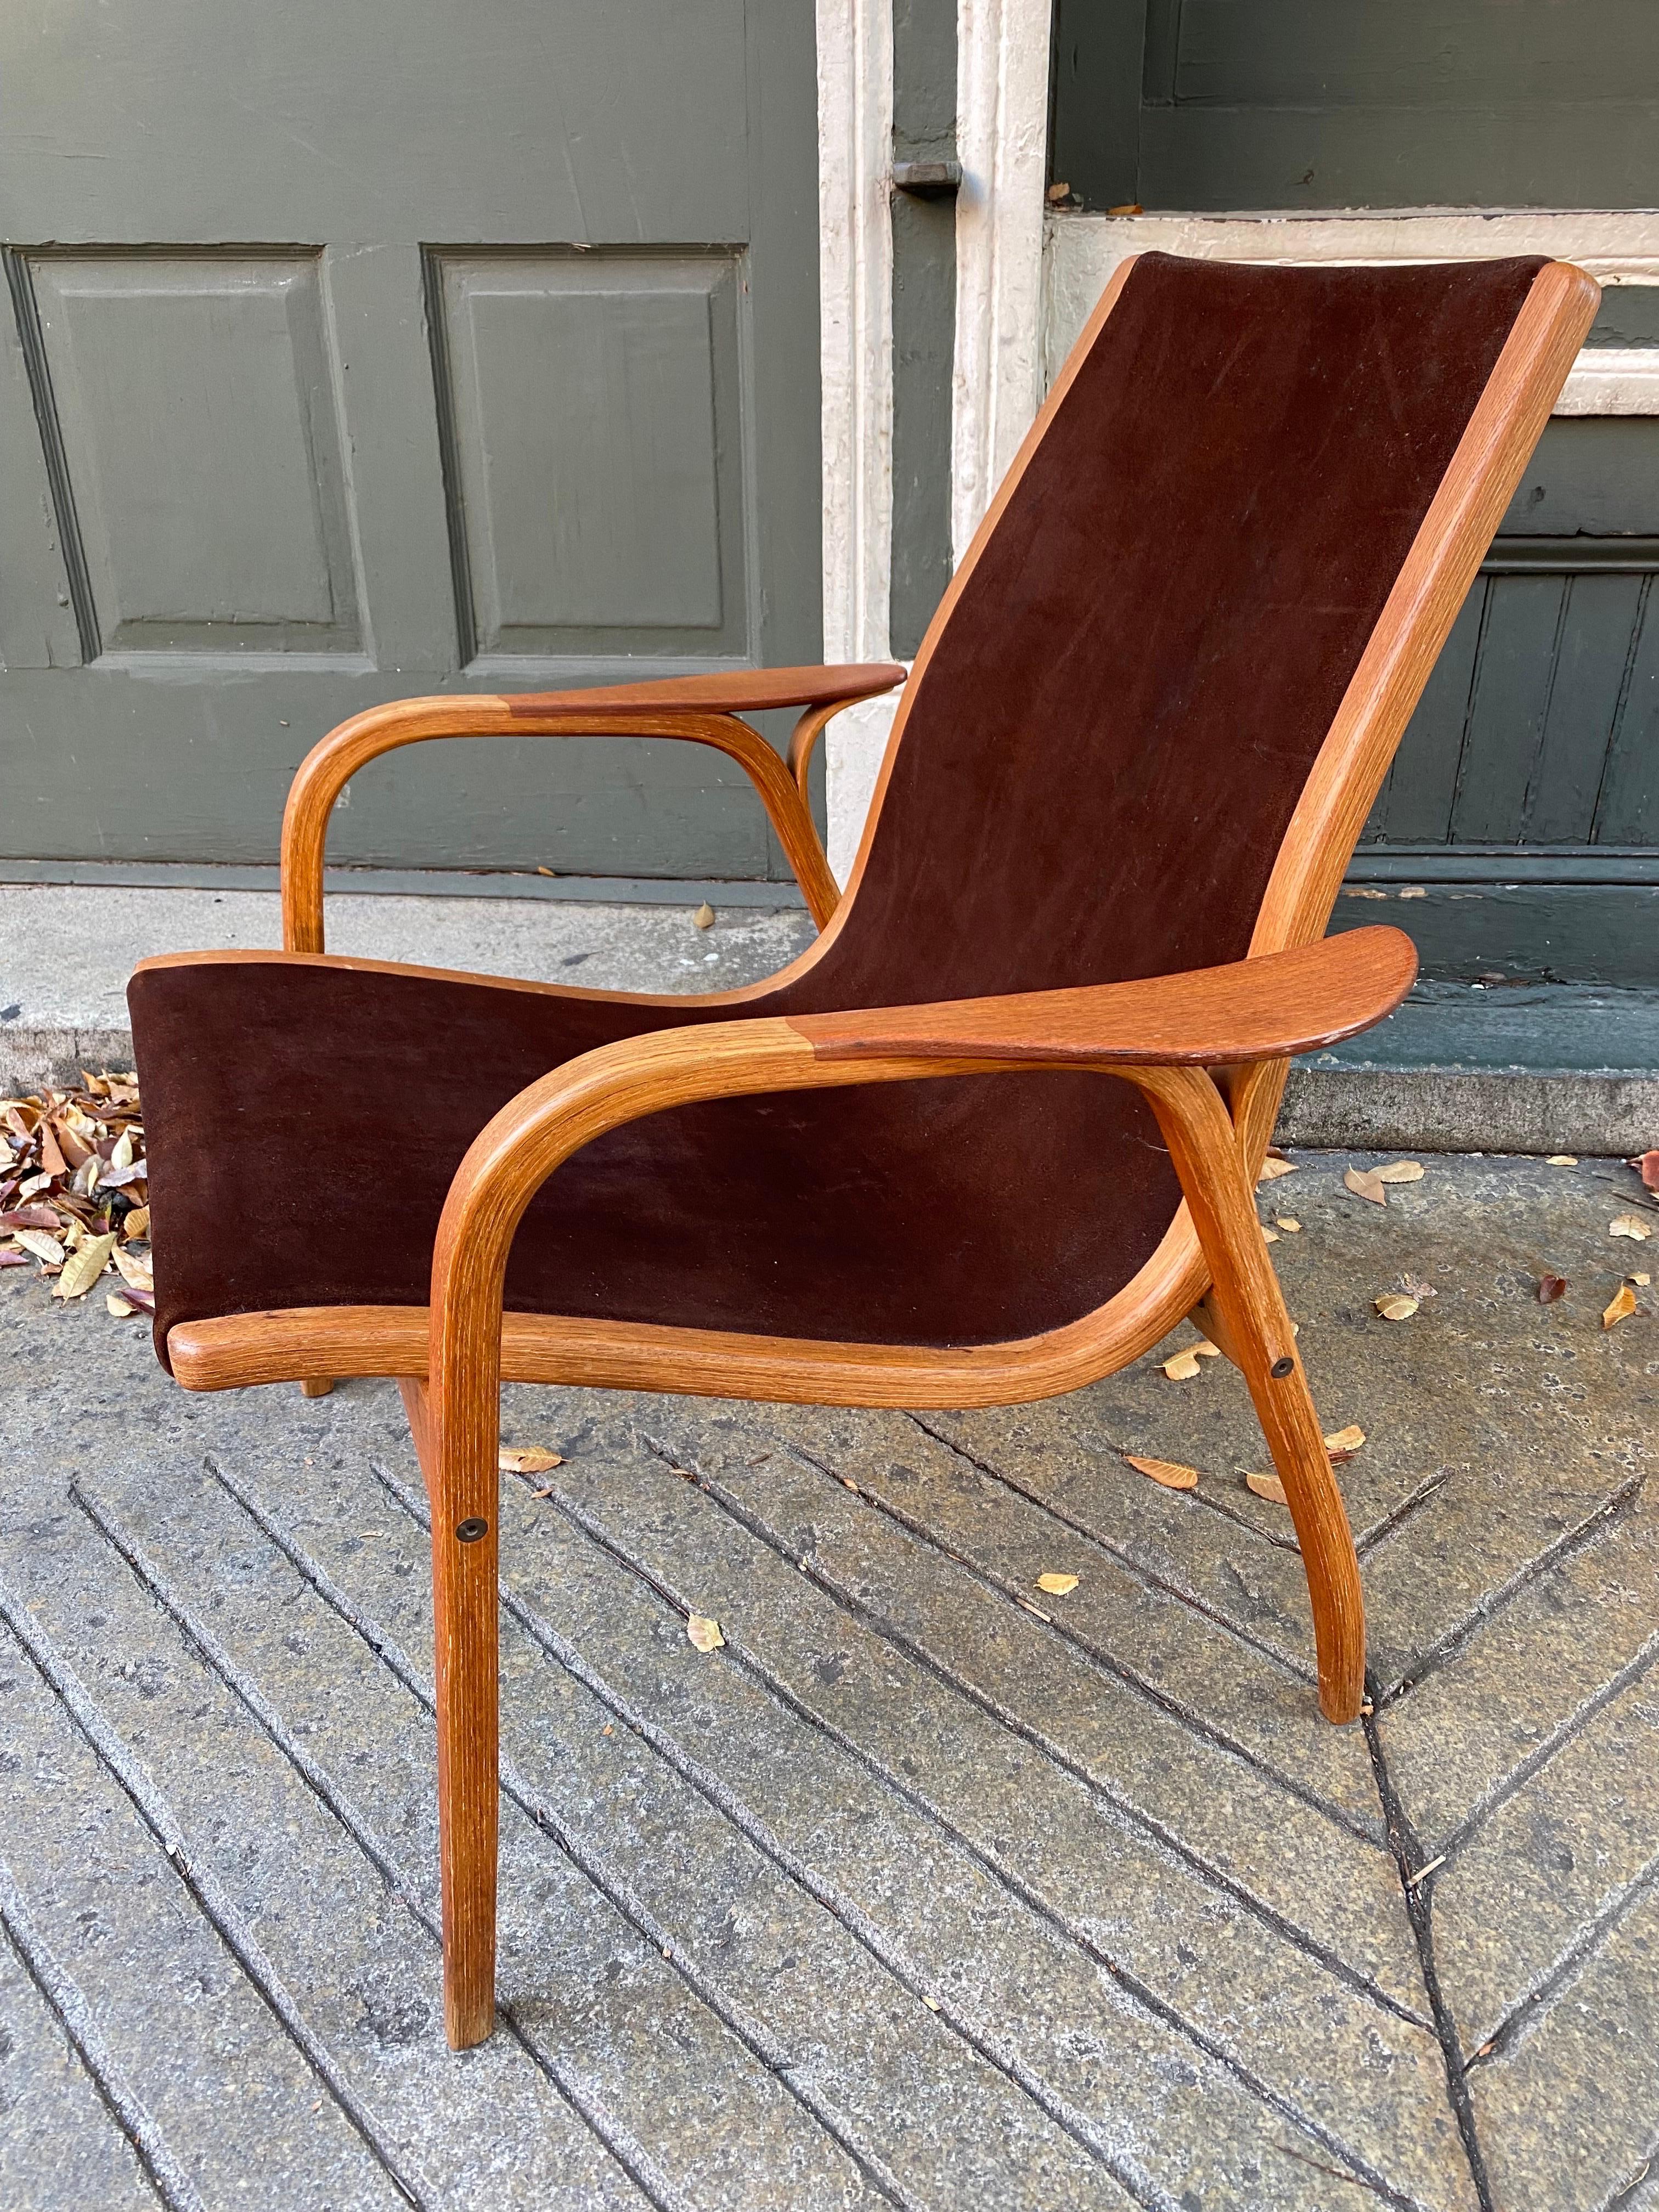 Low Back Yngve Ekstrom Lamino Chair in Brown Leather.  Very Nice Condition!  This one sat in the corner of a formal Living Room so saw very little use!  Bent Oak Frame with Teak Armpads.  Several Lamino Chairs available!